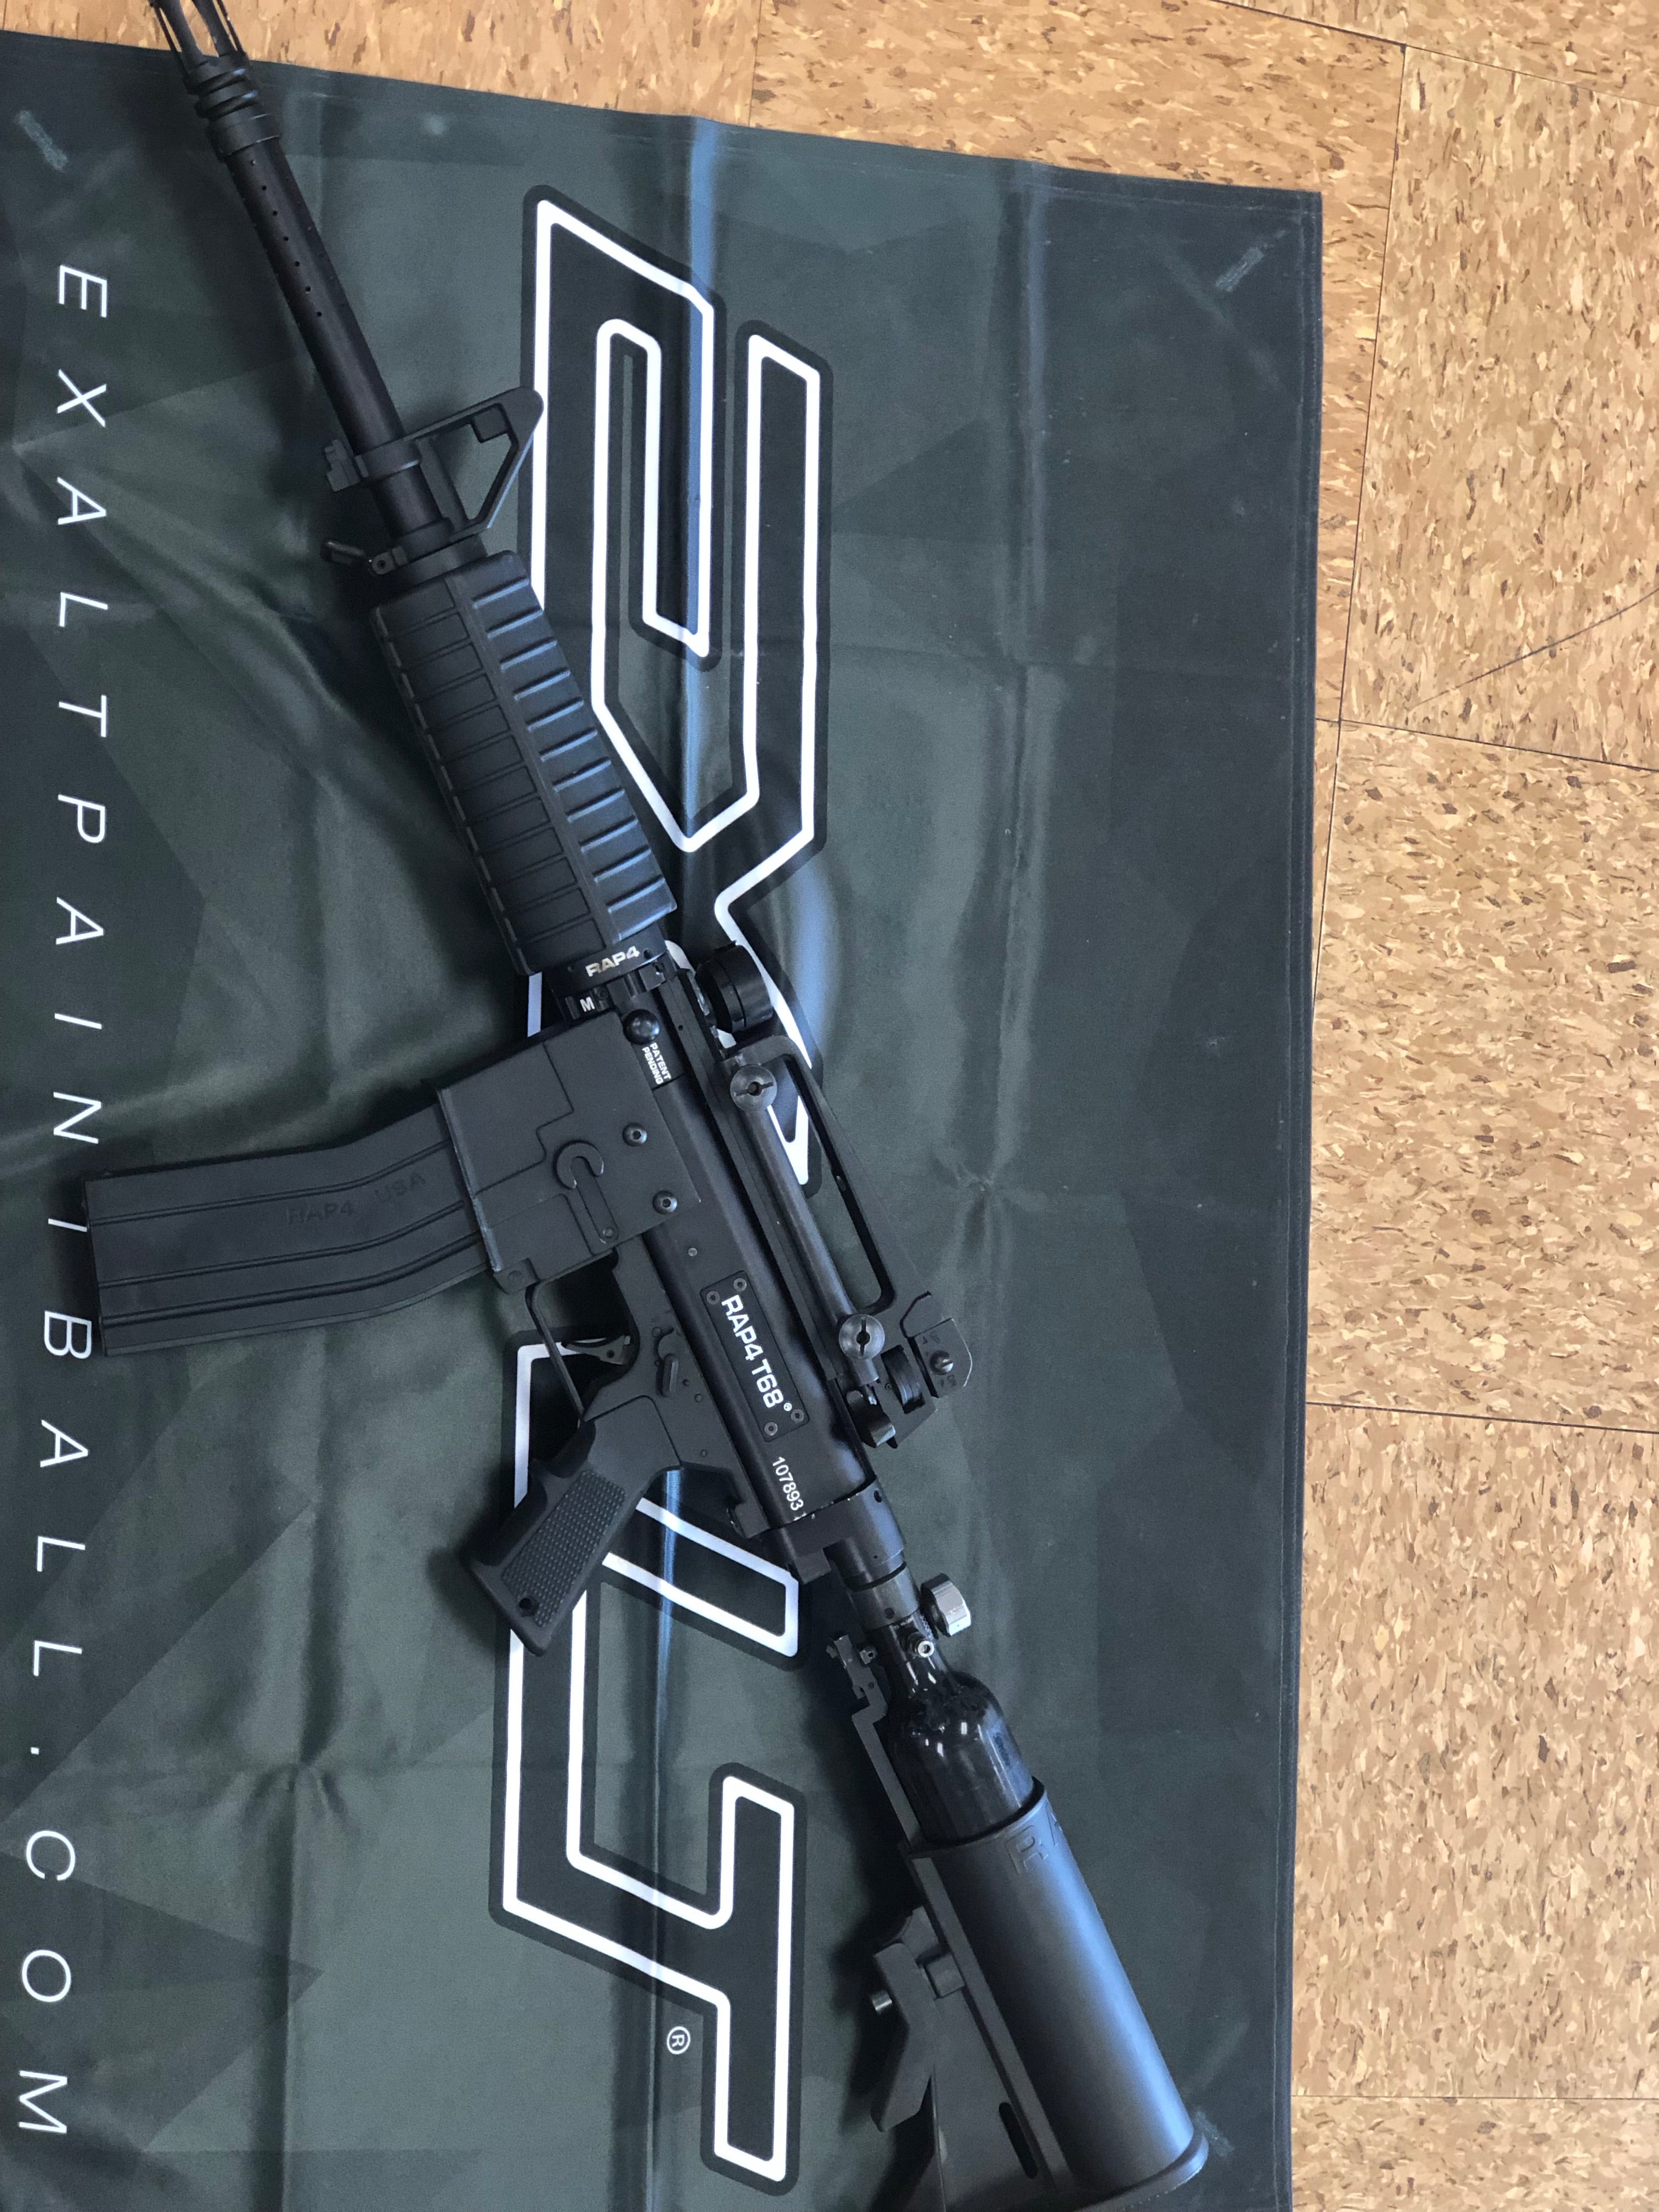 RAP4 T68 Extreme Sniper Paintball Gun photo and picture on